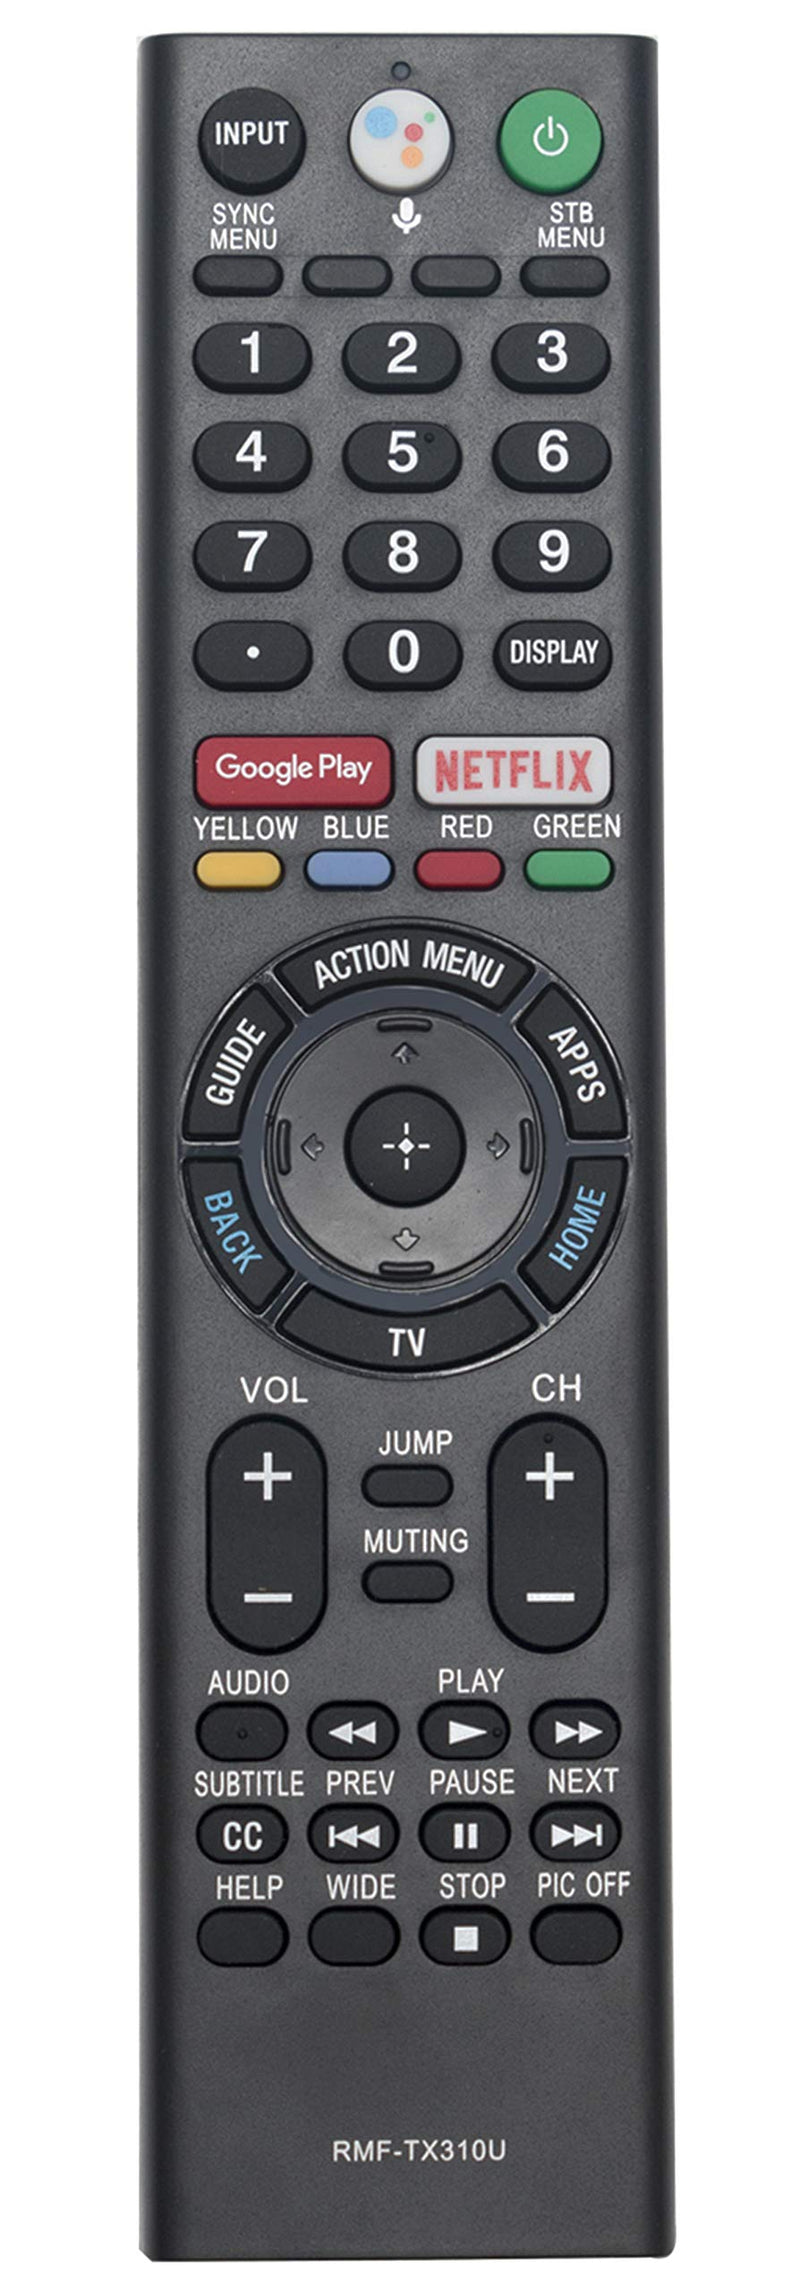 RMF-TX310U Replaced Voice Remote fit for Sony BRAVIA TV XBR-60X830F XBR70X830F XBR-70X830F XBR-43X800G XBR-55X800G XBR-65X800G XBR-75X800G XBR-85X900F XBR-49X900F XBR-55X900F XBR-65X900F XBR-75X900F